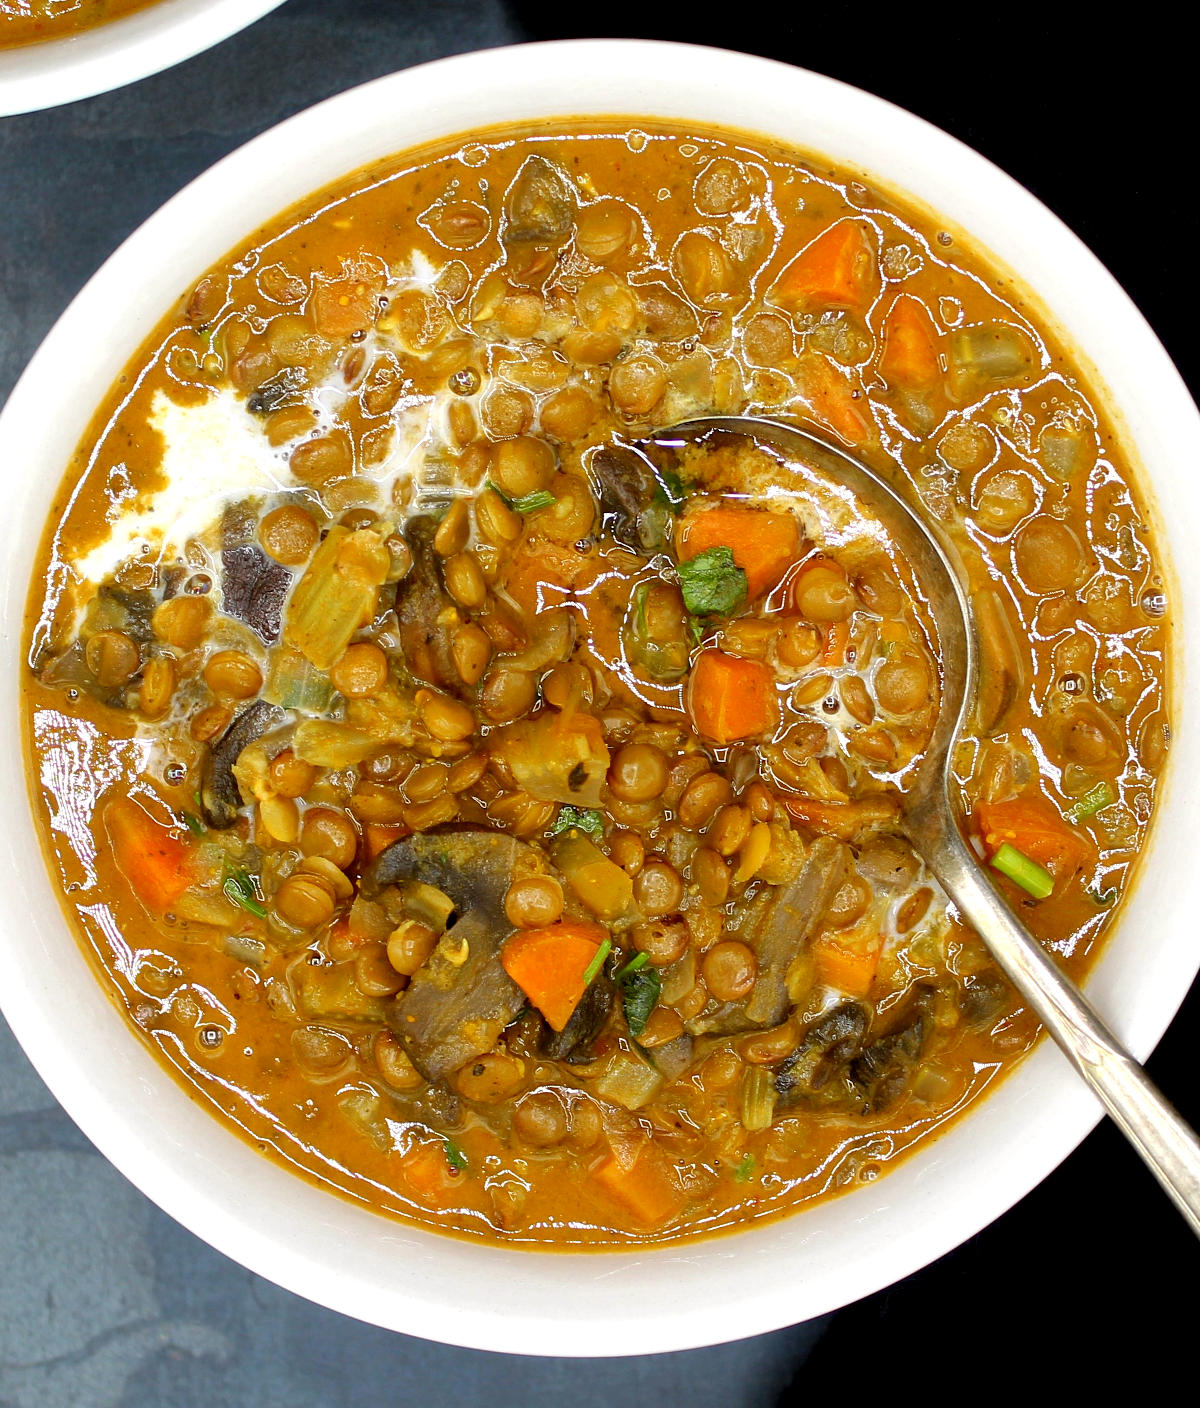 Brown lentil soup with vegetables and a spoon with coconut milk stirred in.